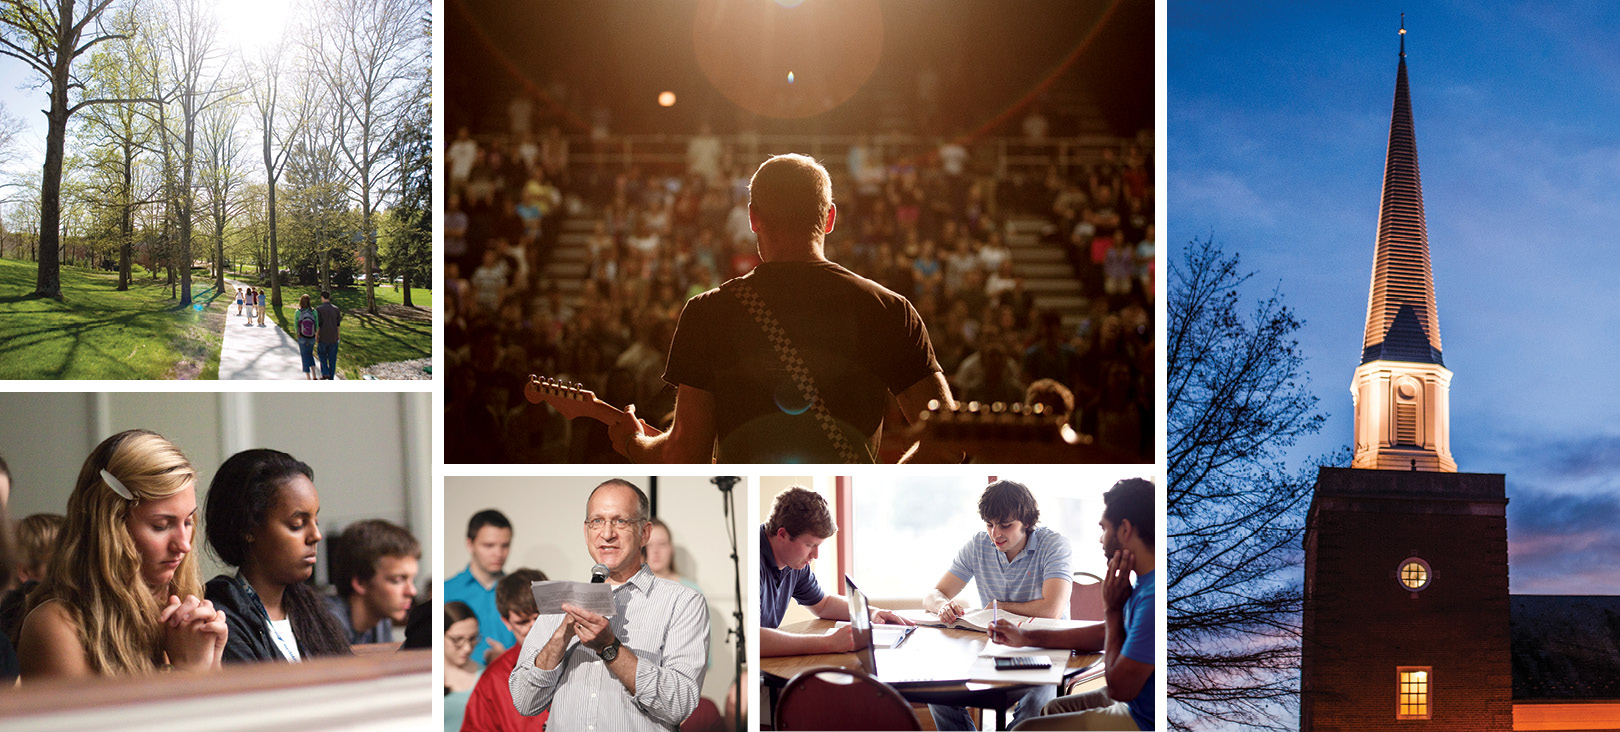 Campus Ministries at Messiah University MCMinistries Subsite Page Banner 2.jpg